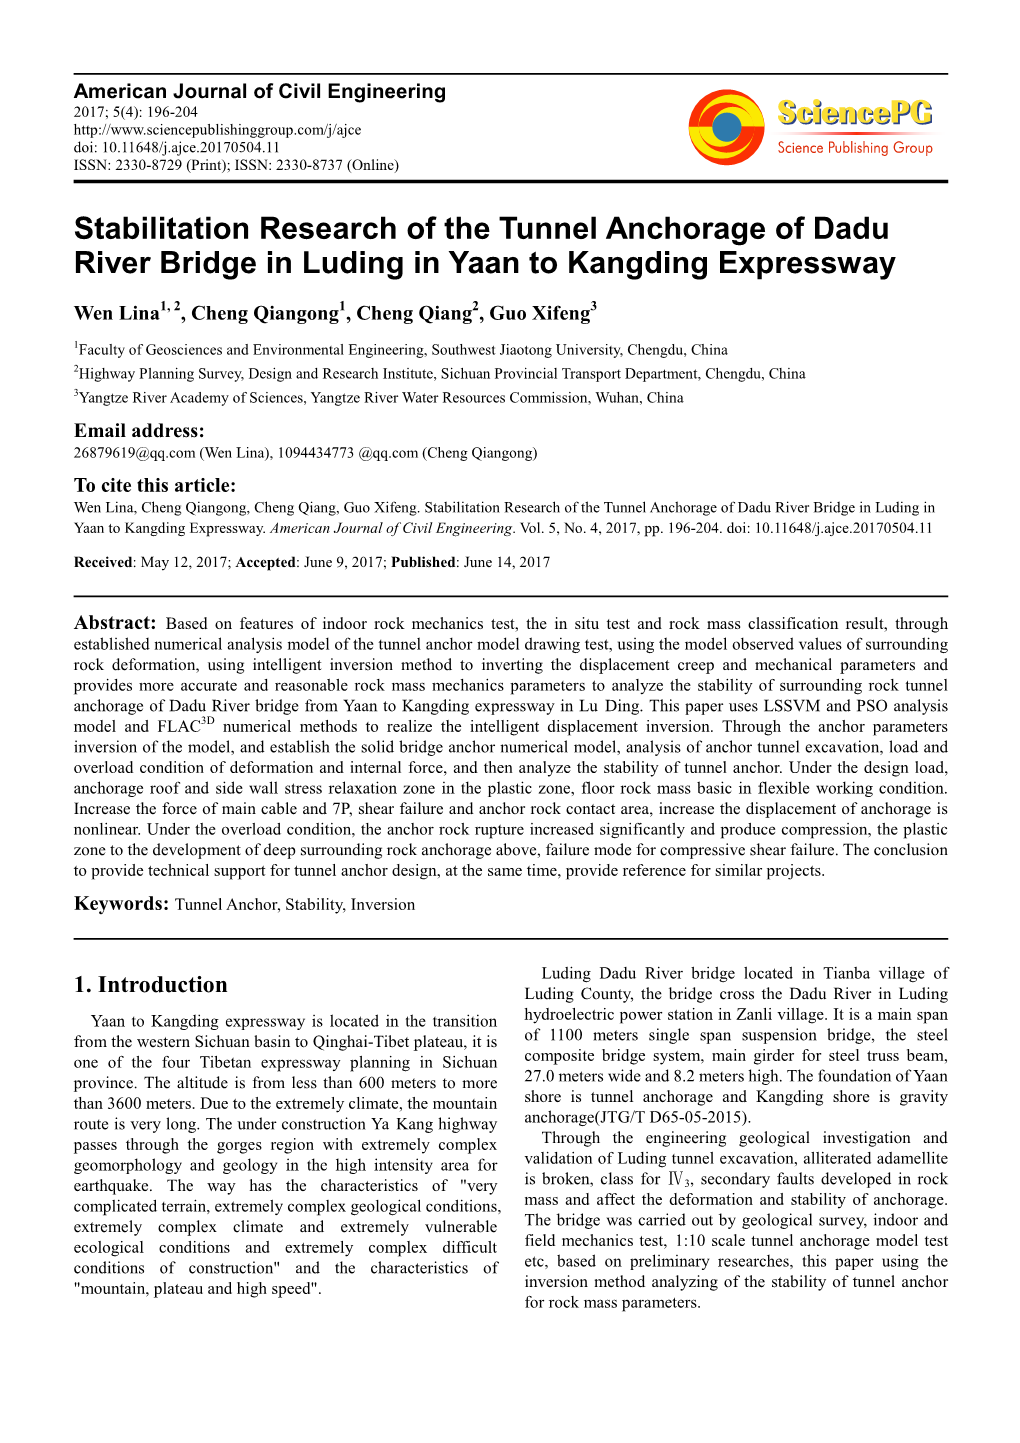 Stabilitation Research of the Tunnel Anchorage of Dadu River Bridge in Luding in Yaan to Kangding Expressway